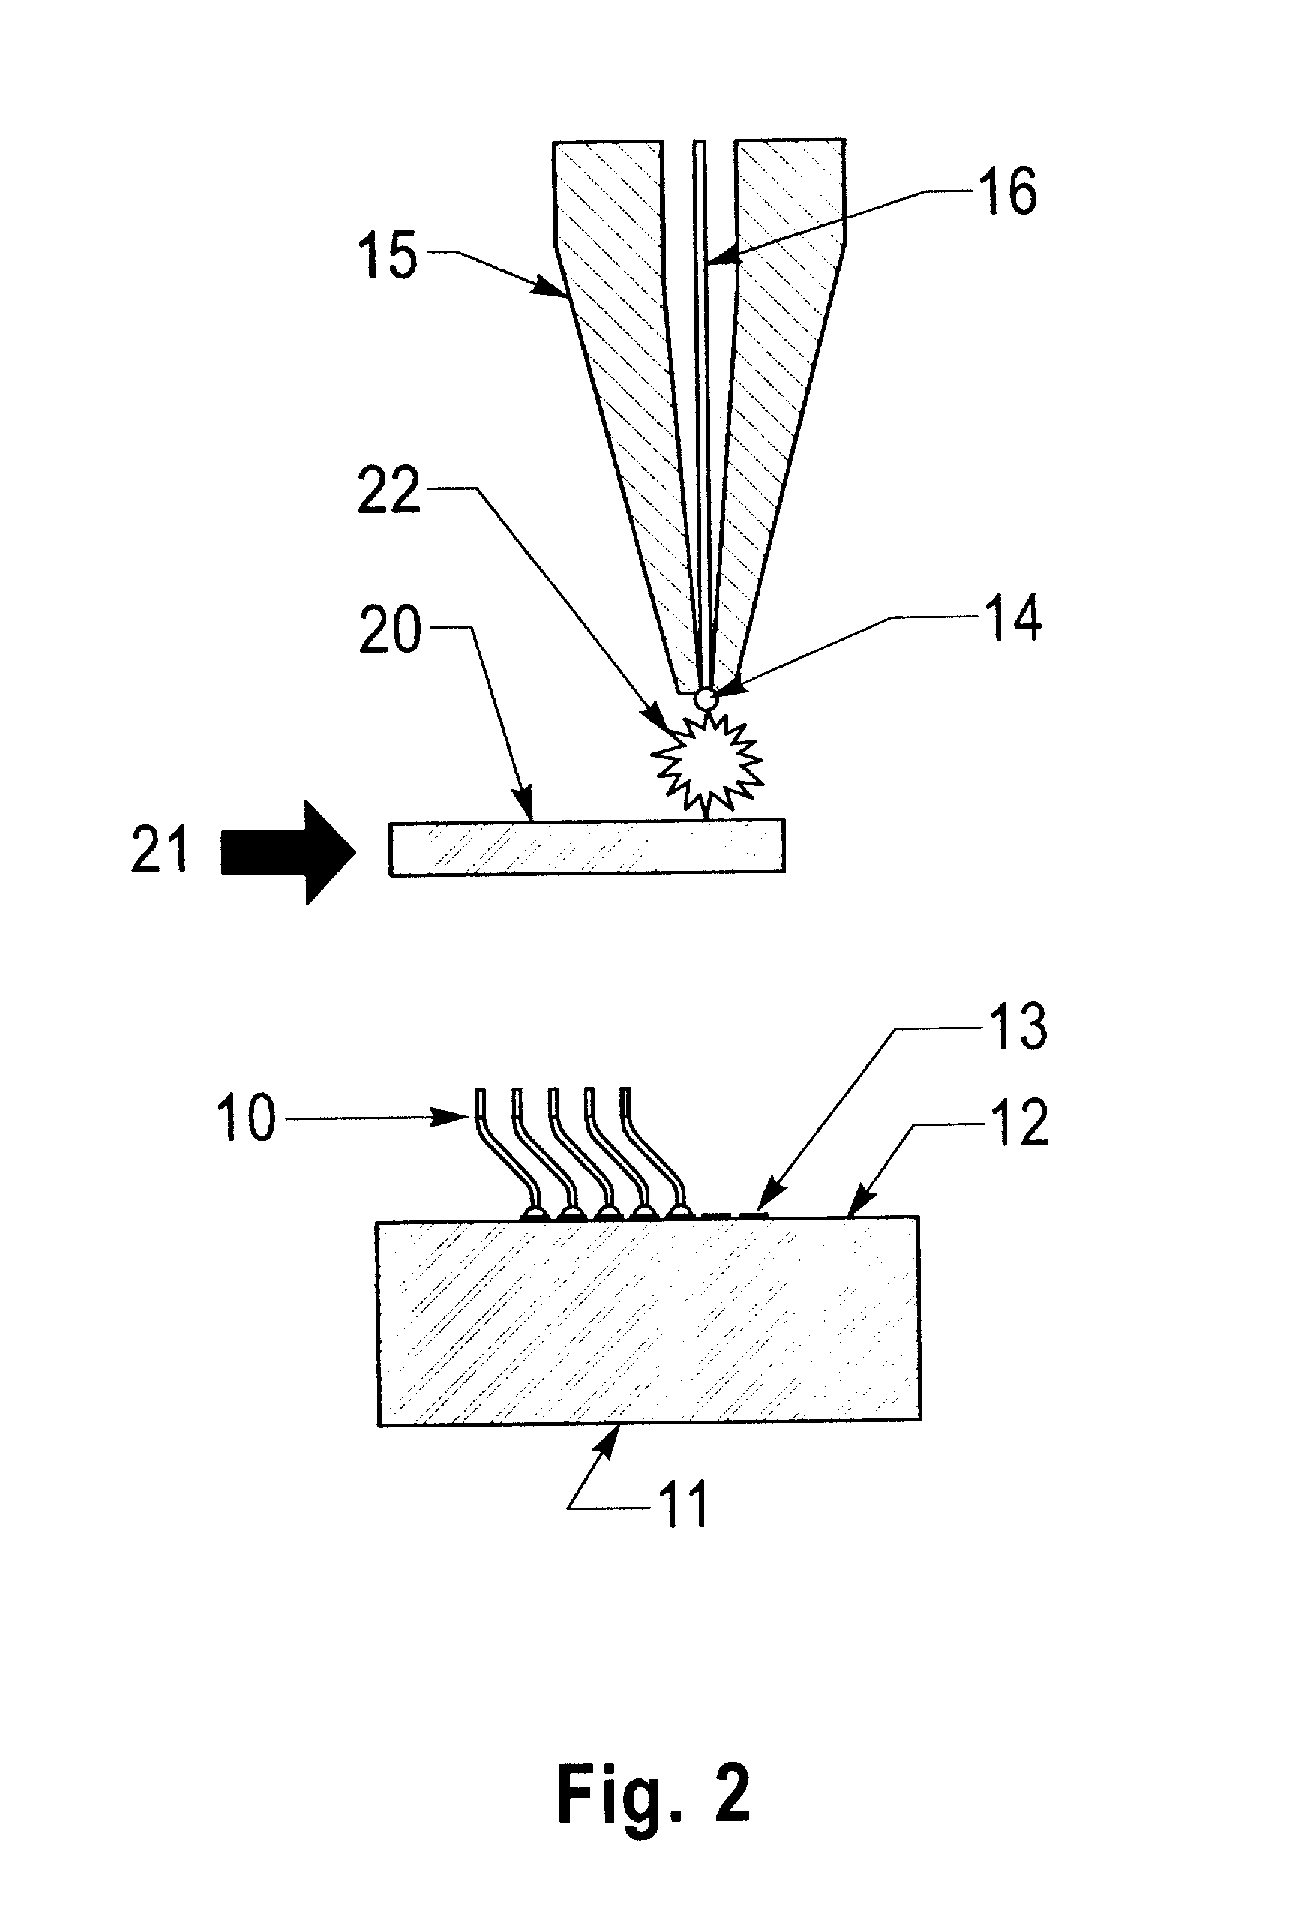 Angled flying lead wire bonding process